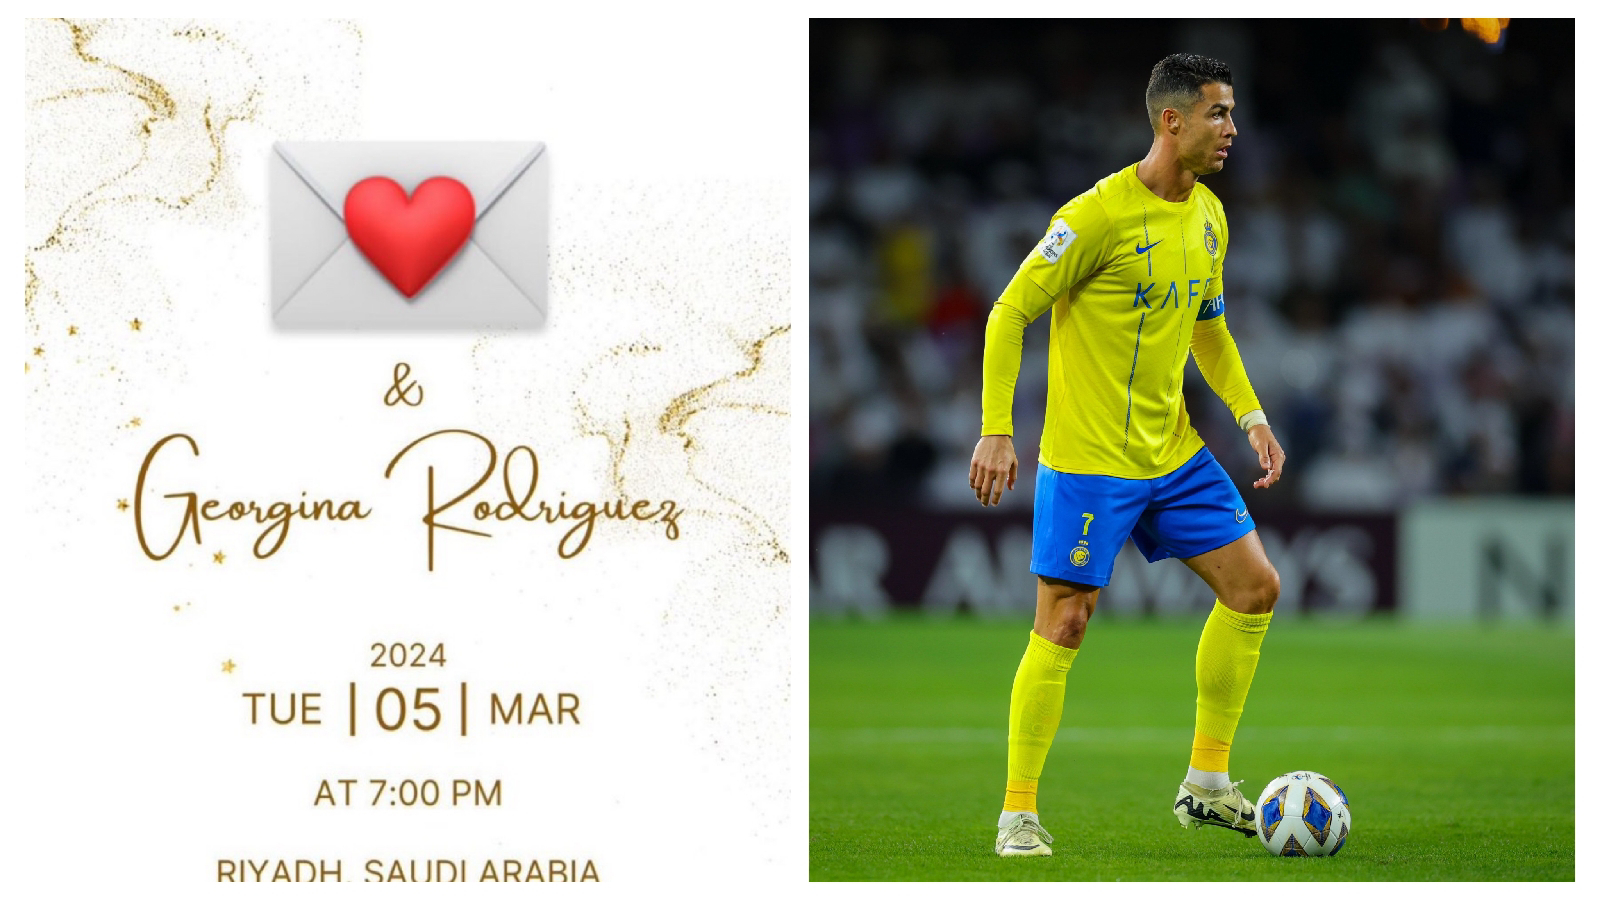 PICTURE Reactions to trending wedding invitation card IV of Cristiano